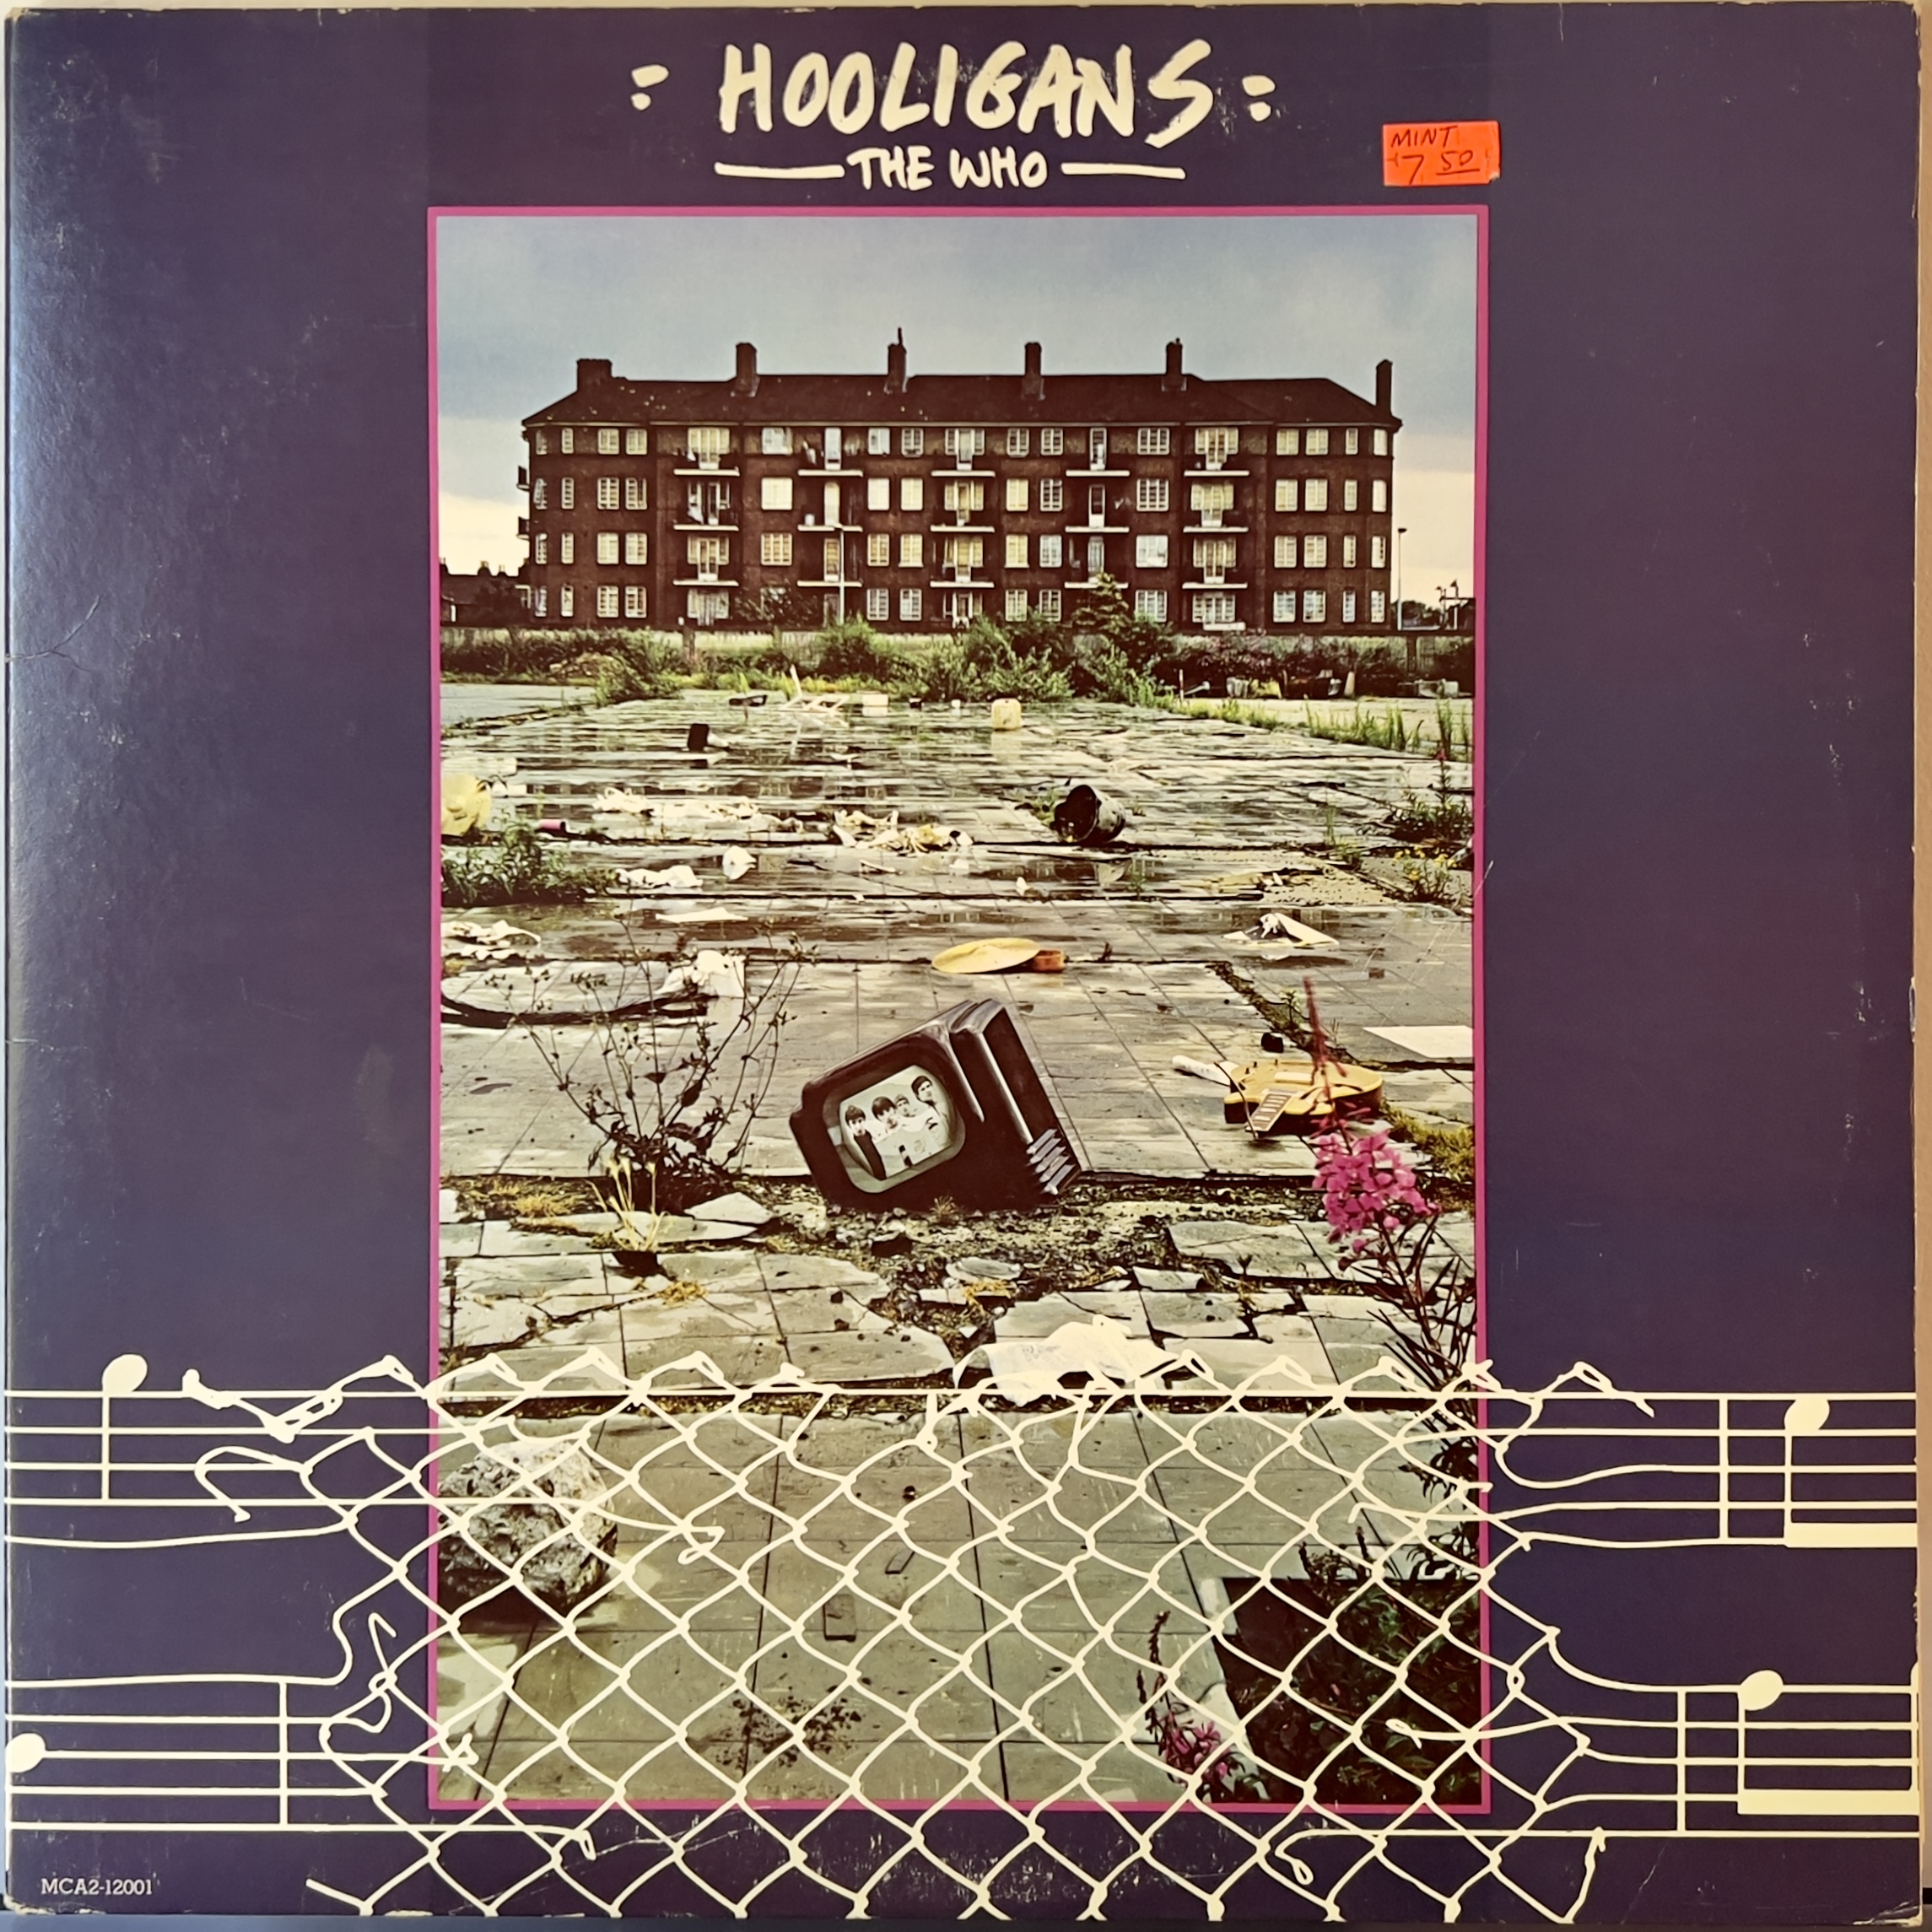 Hooligans by The Who